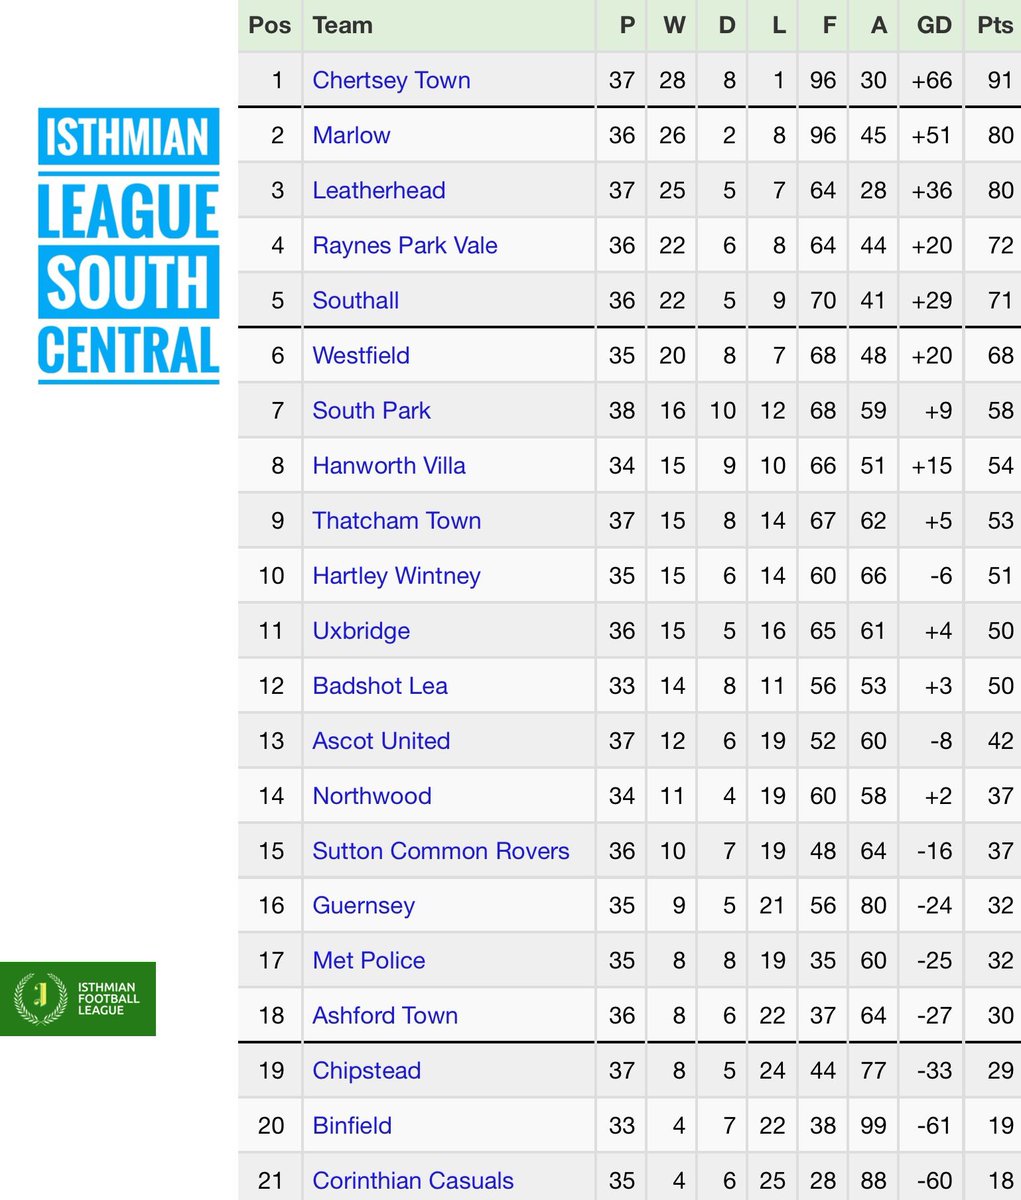 🔵🔴 Chertsey need 2 more points to be crowned Champions. Something going on in 4th, 5th & 6th. I’d wish good luck to the teams scraping hard down at the bottom but we’ve got to play 3 of them.